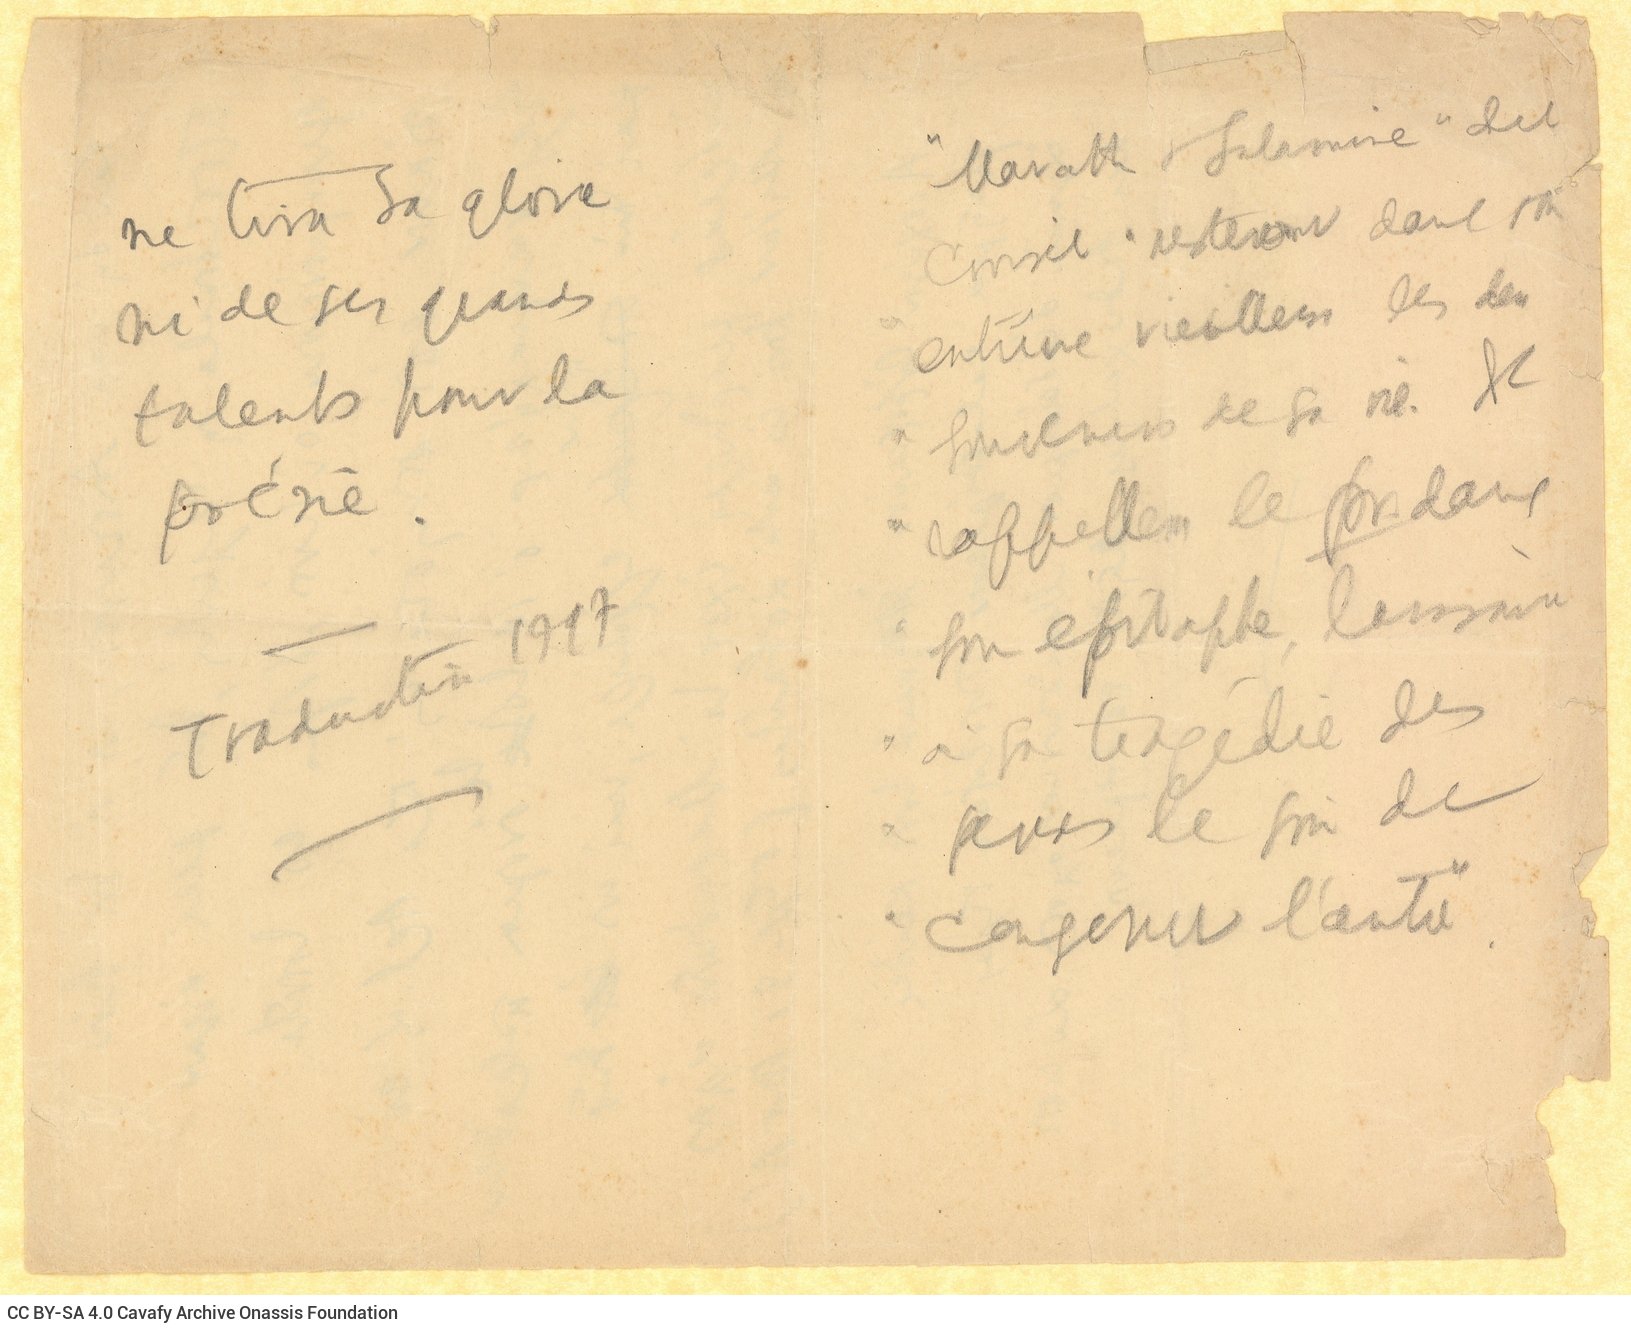 Handwritten notes on both sides of a sheet. Reference to Aeschylus and citation. Quote in French and note that reads "Trad